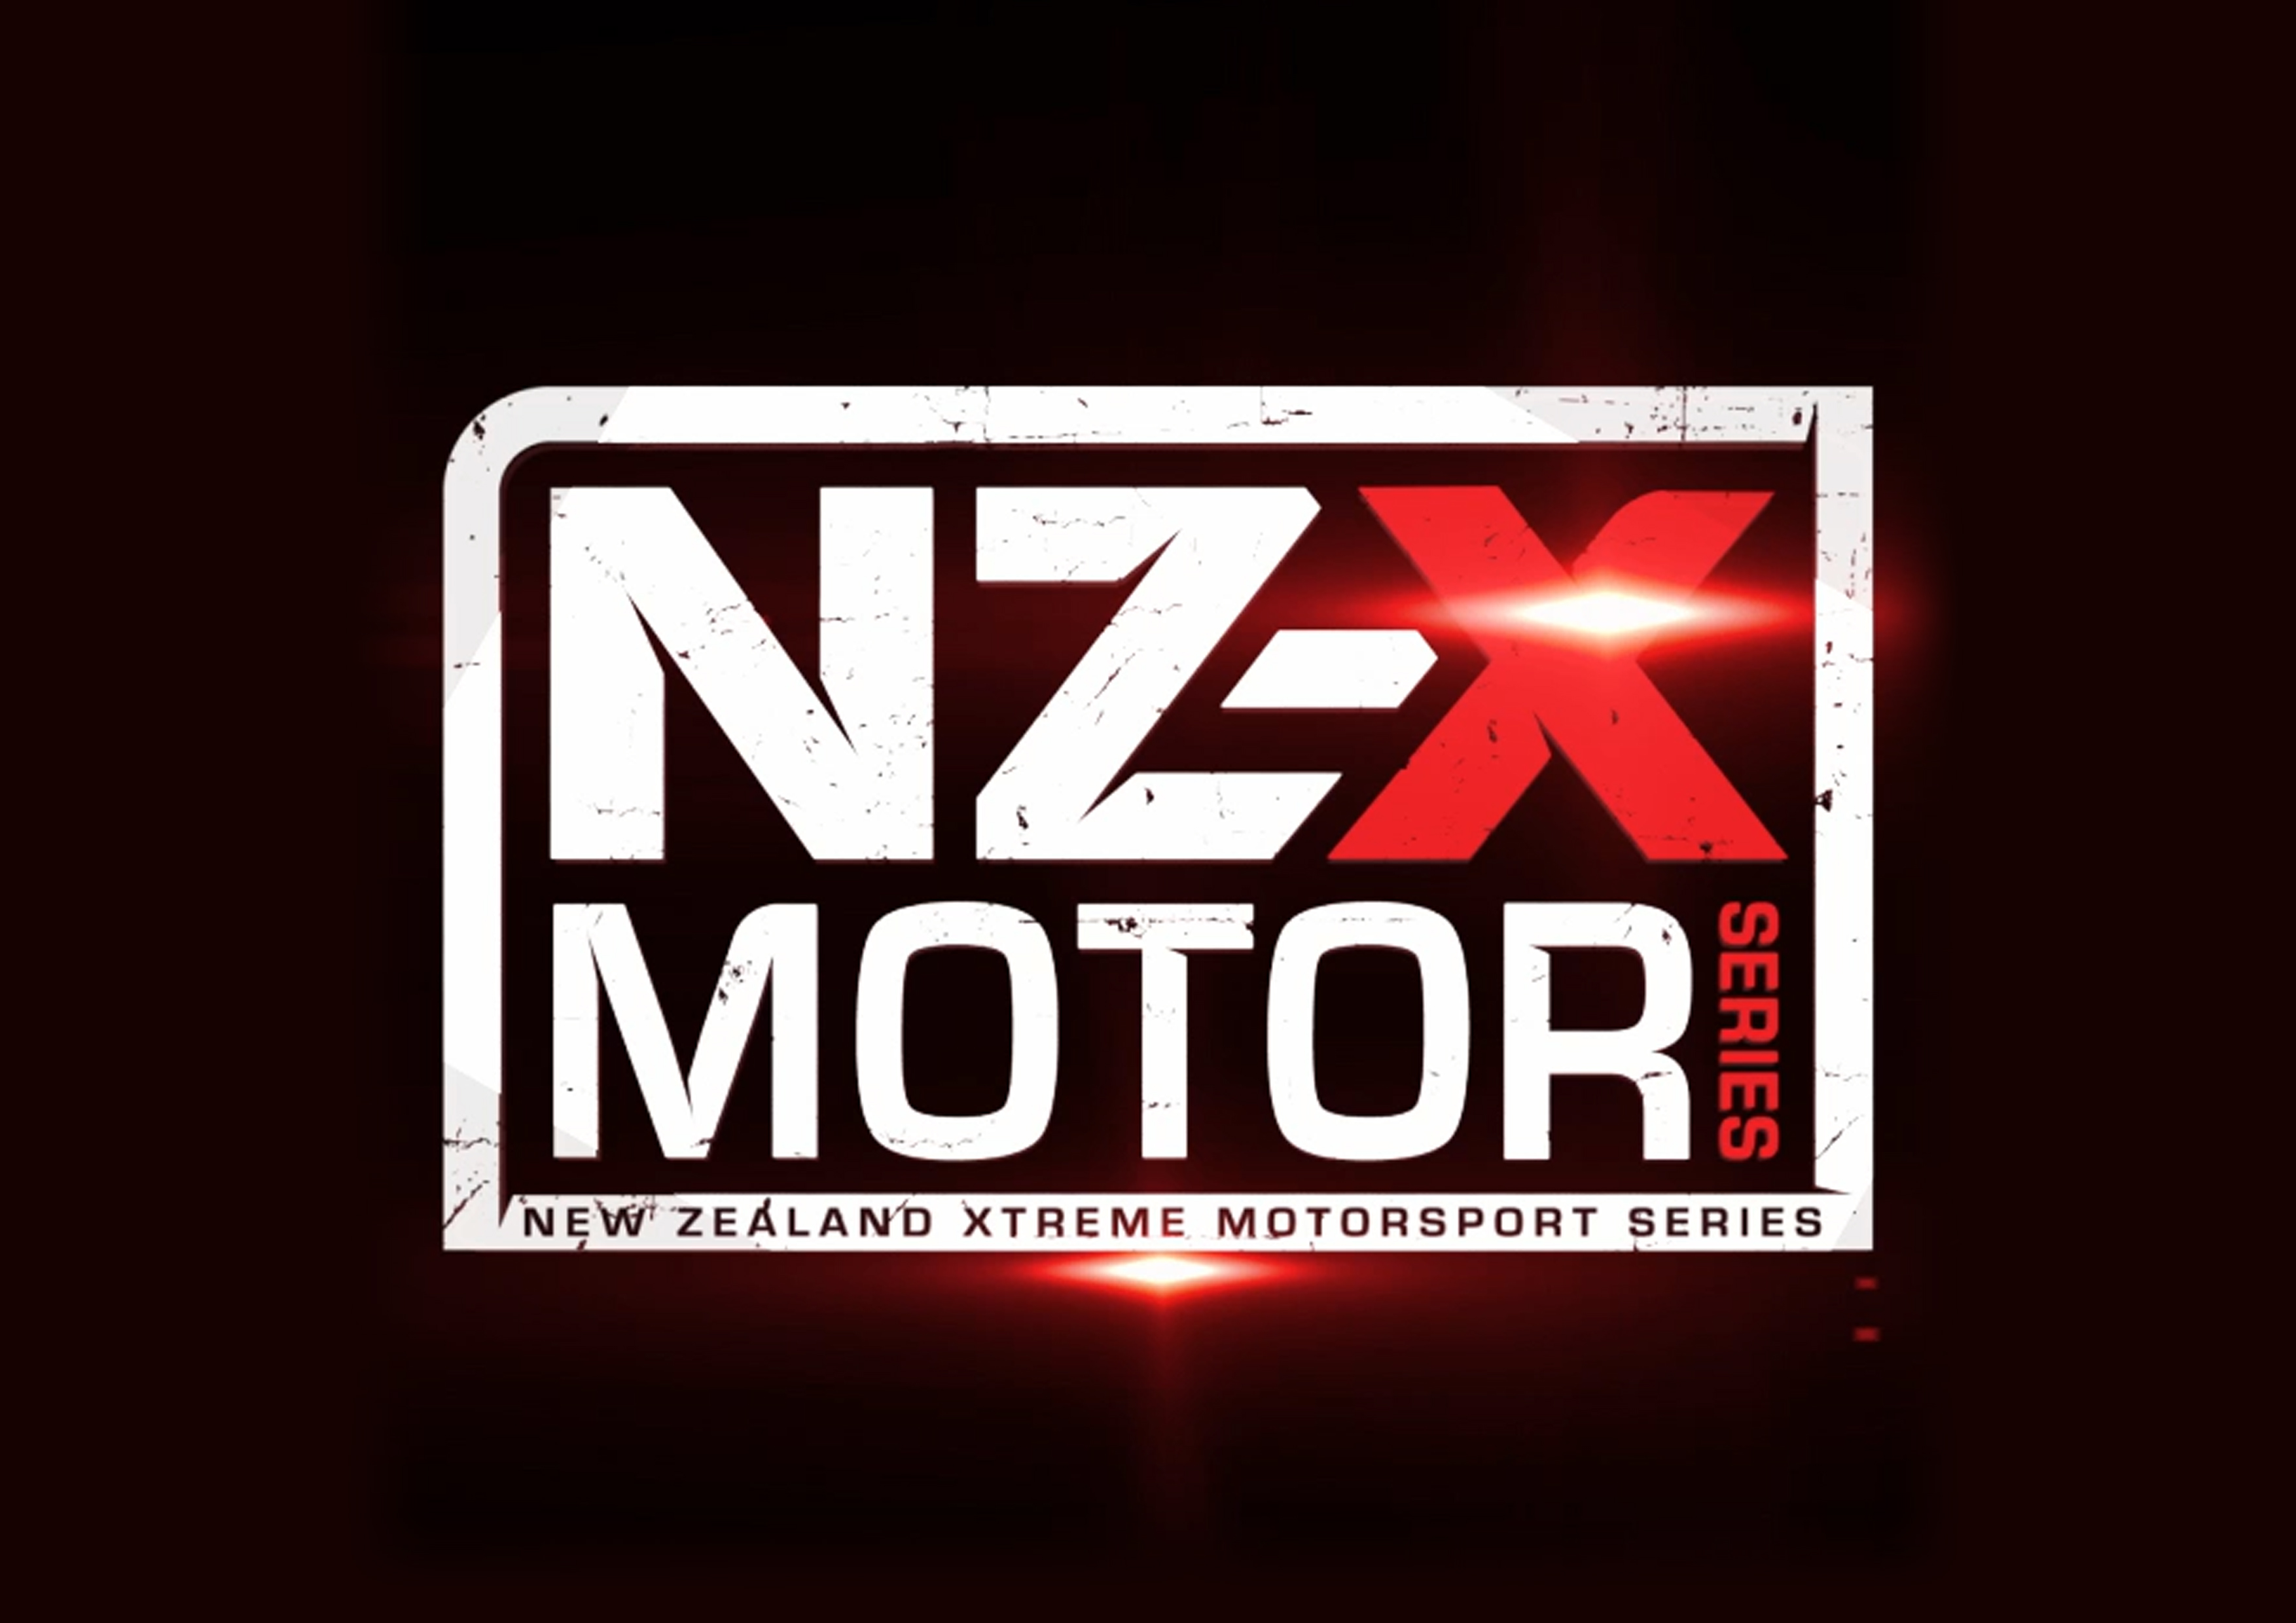 New Zealand Xtreme Motorsport Series to debut in 2018